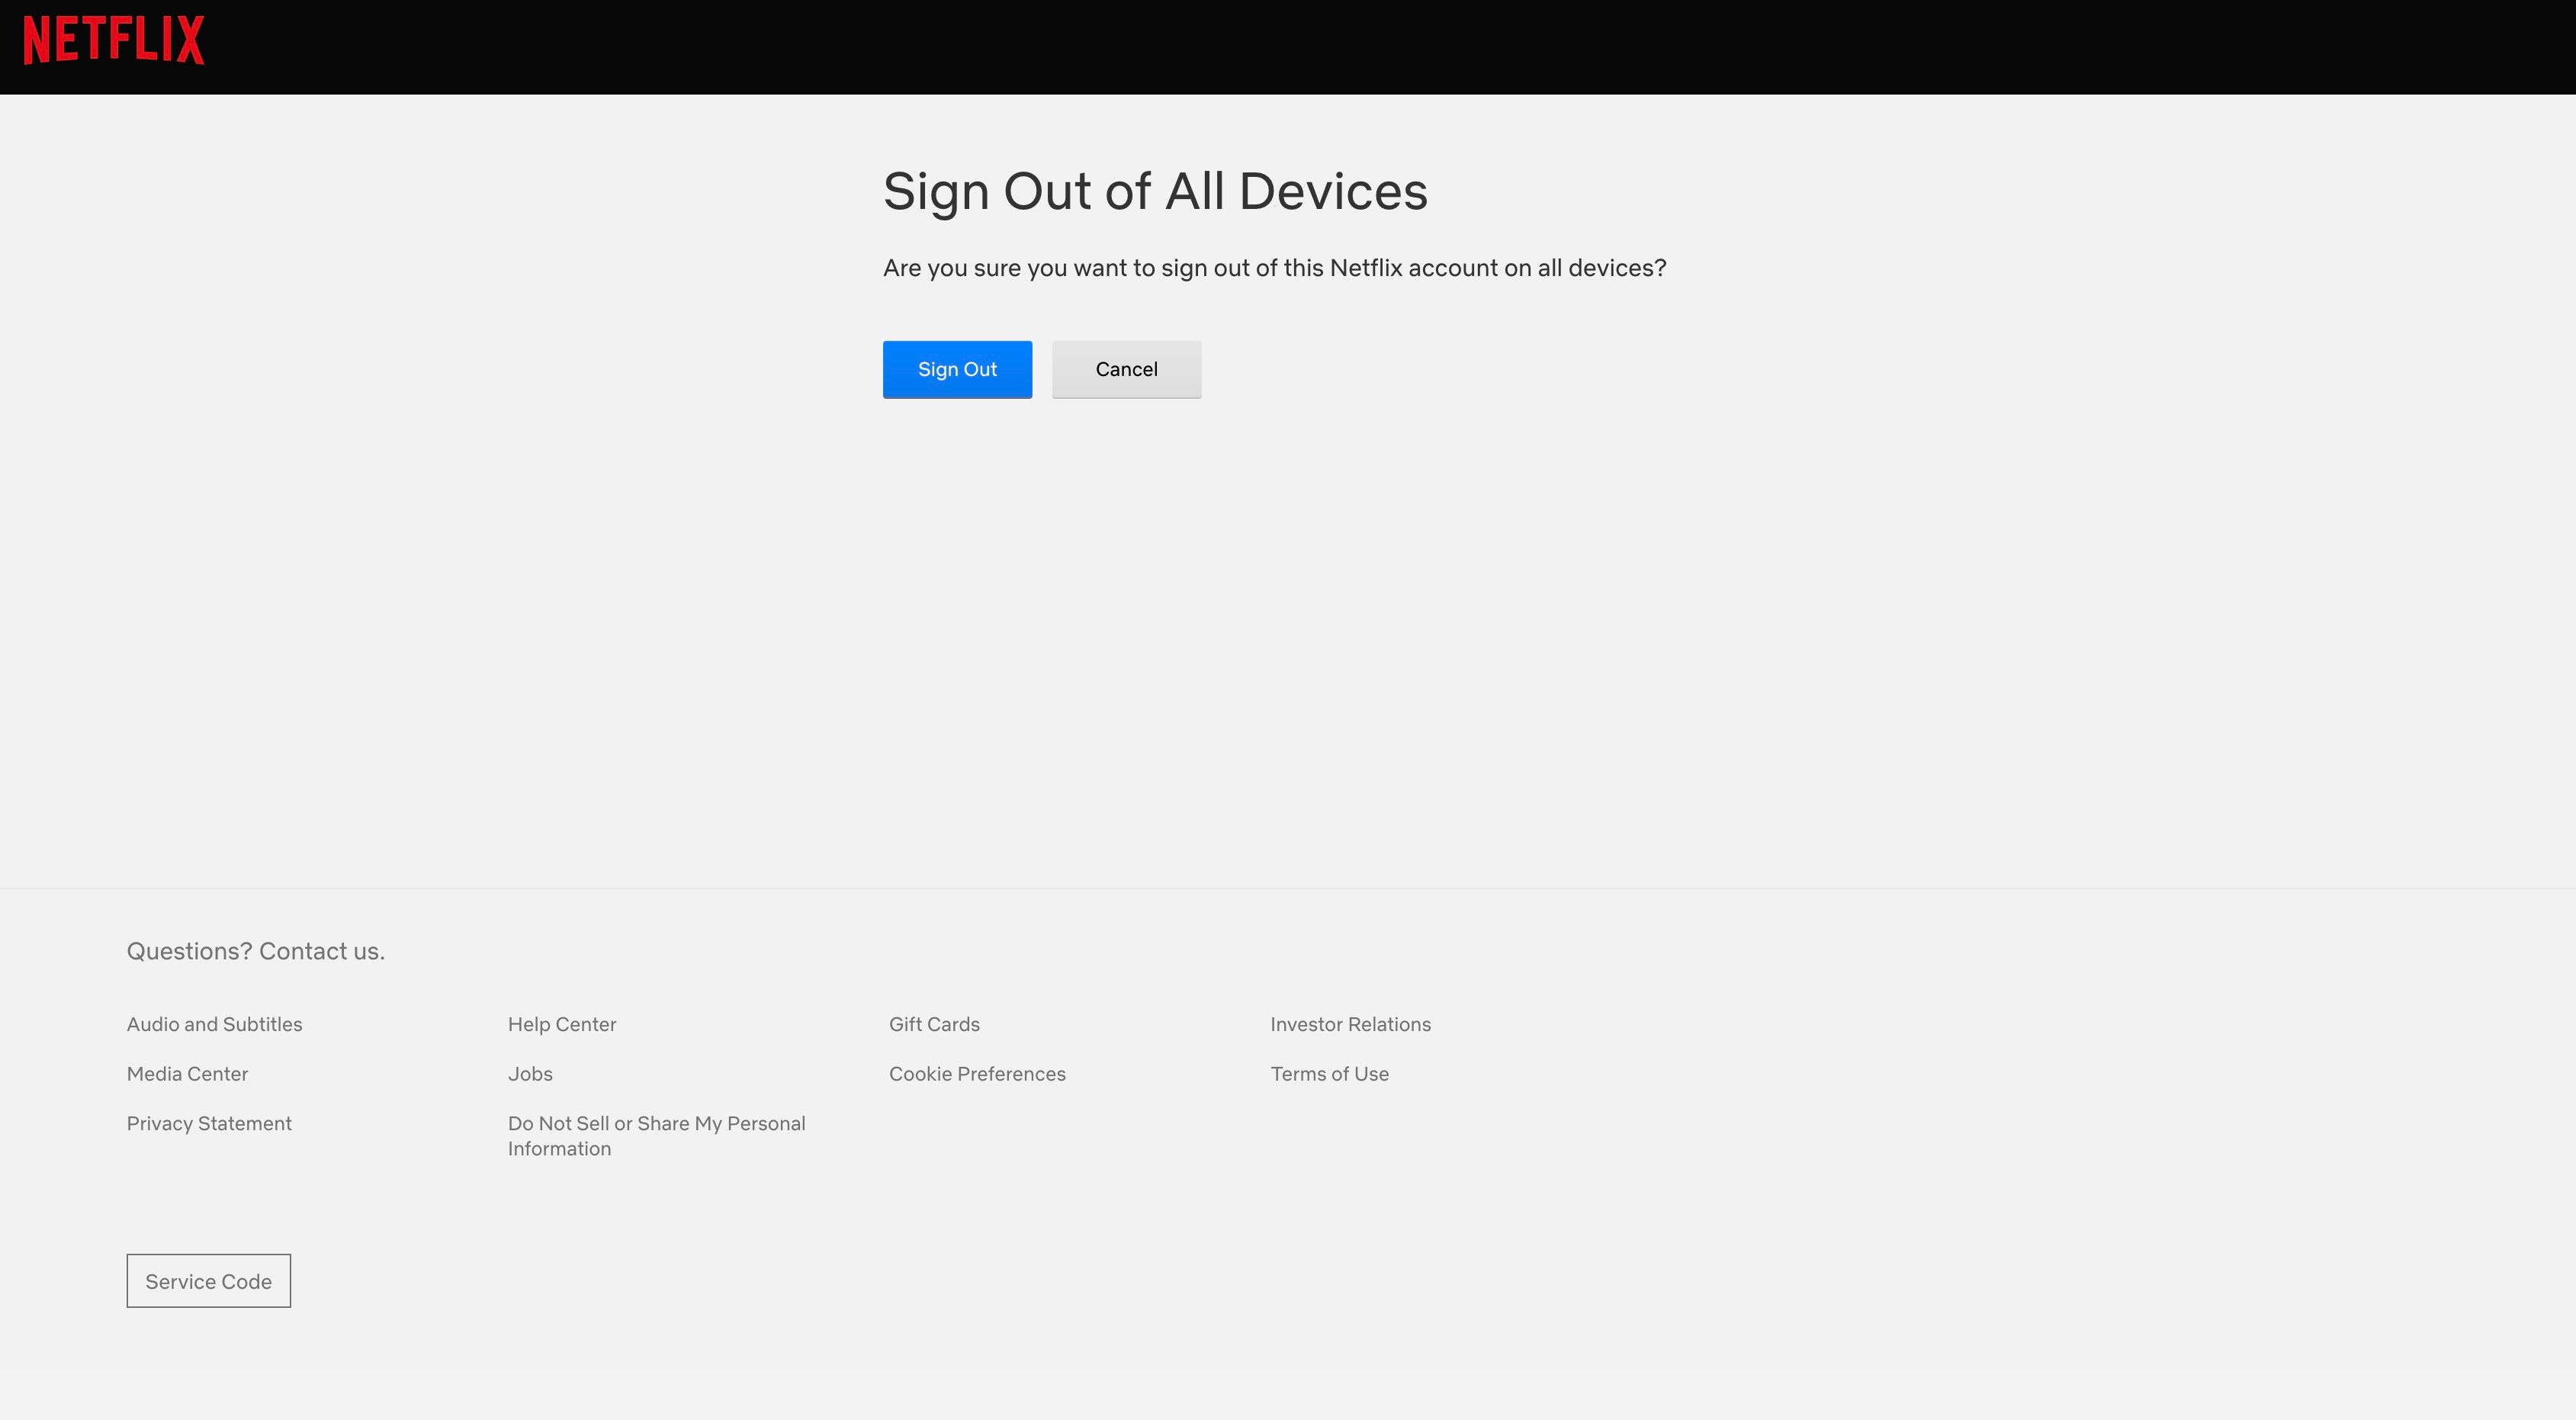 Netflix Sign out of all devices page with sign out or cancel button